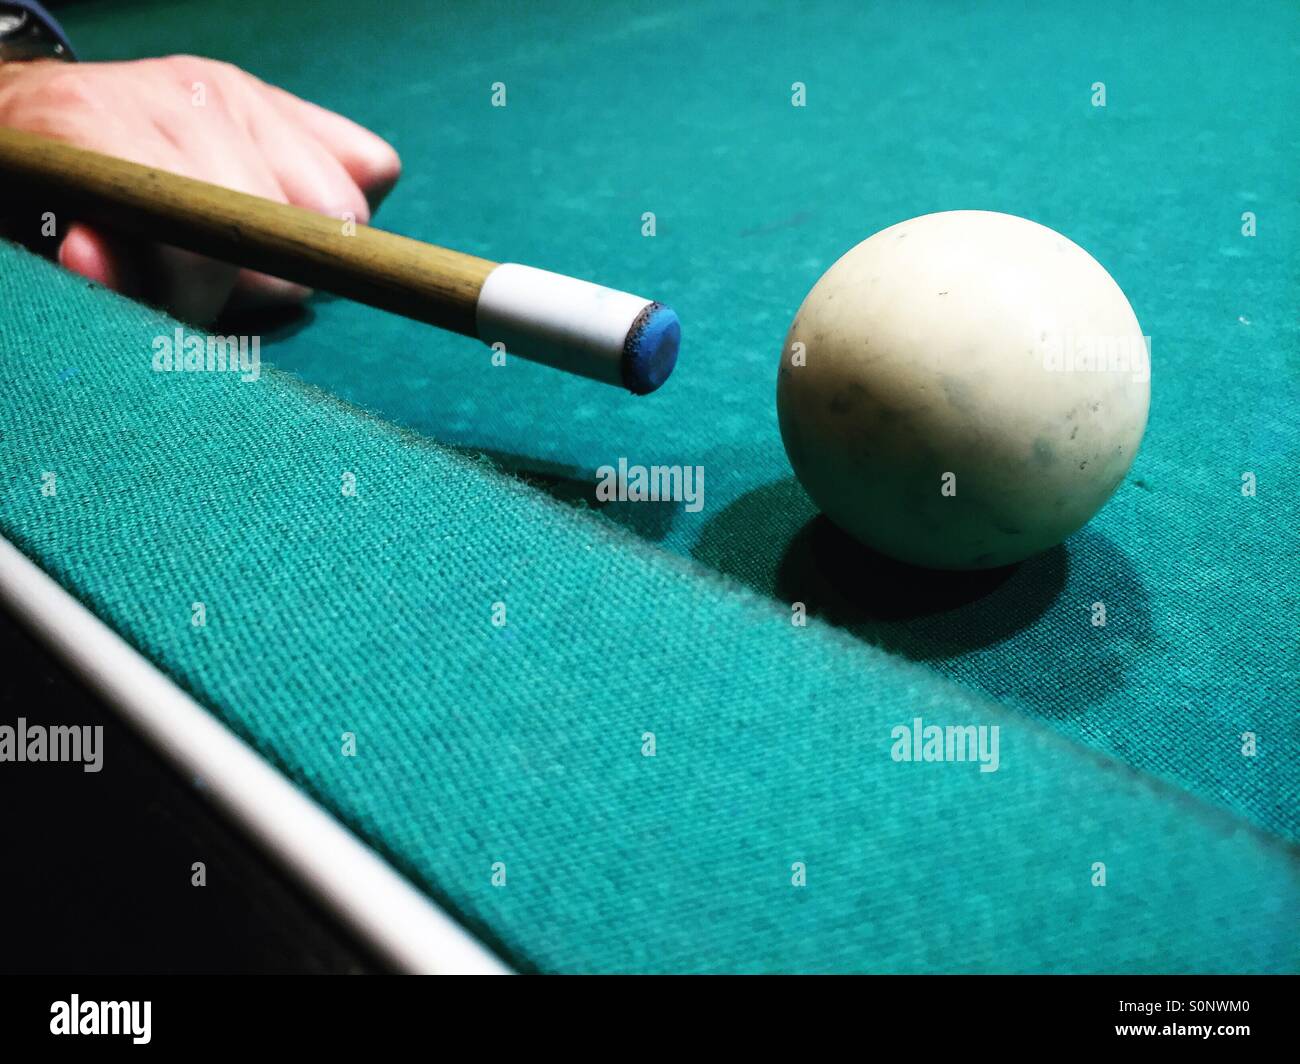 A man playing snooker. Stock Photo